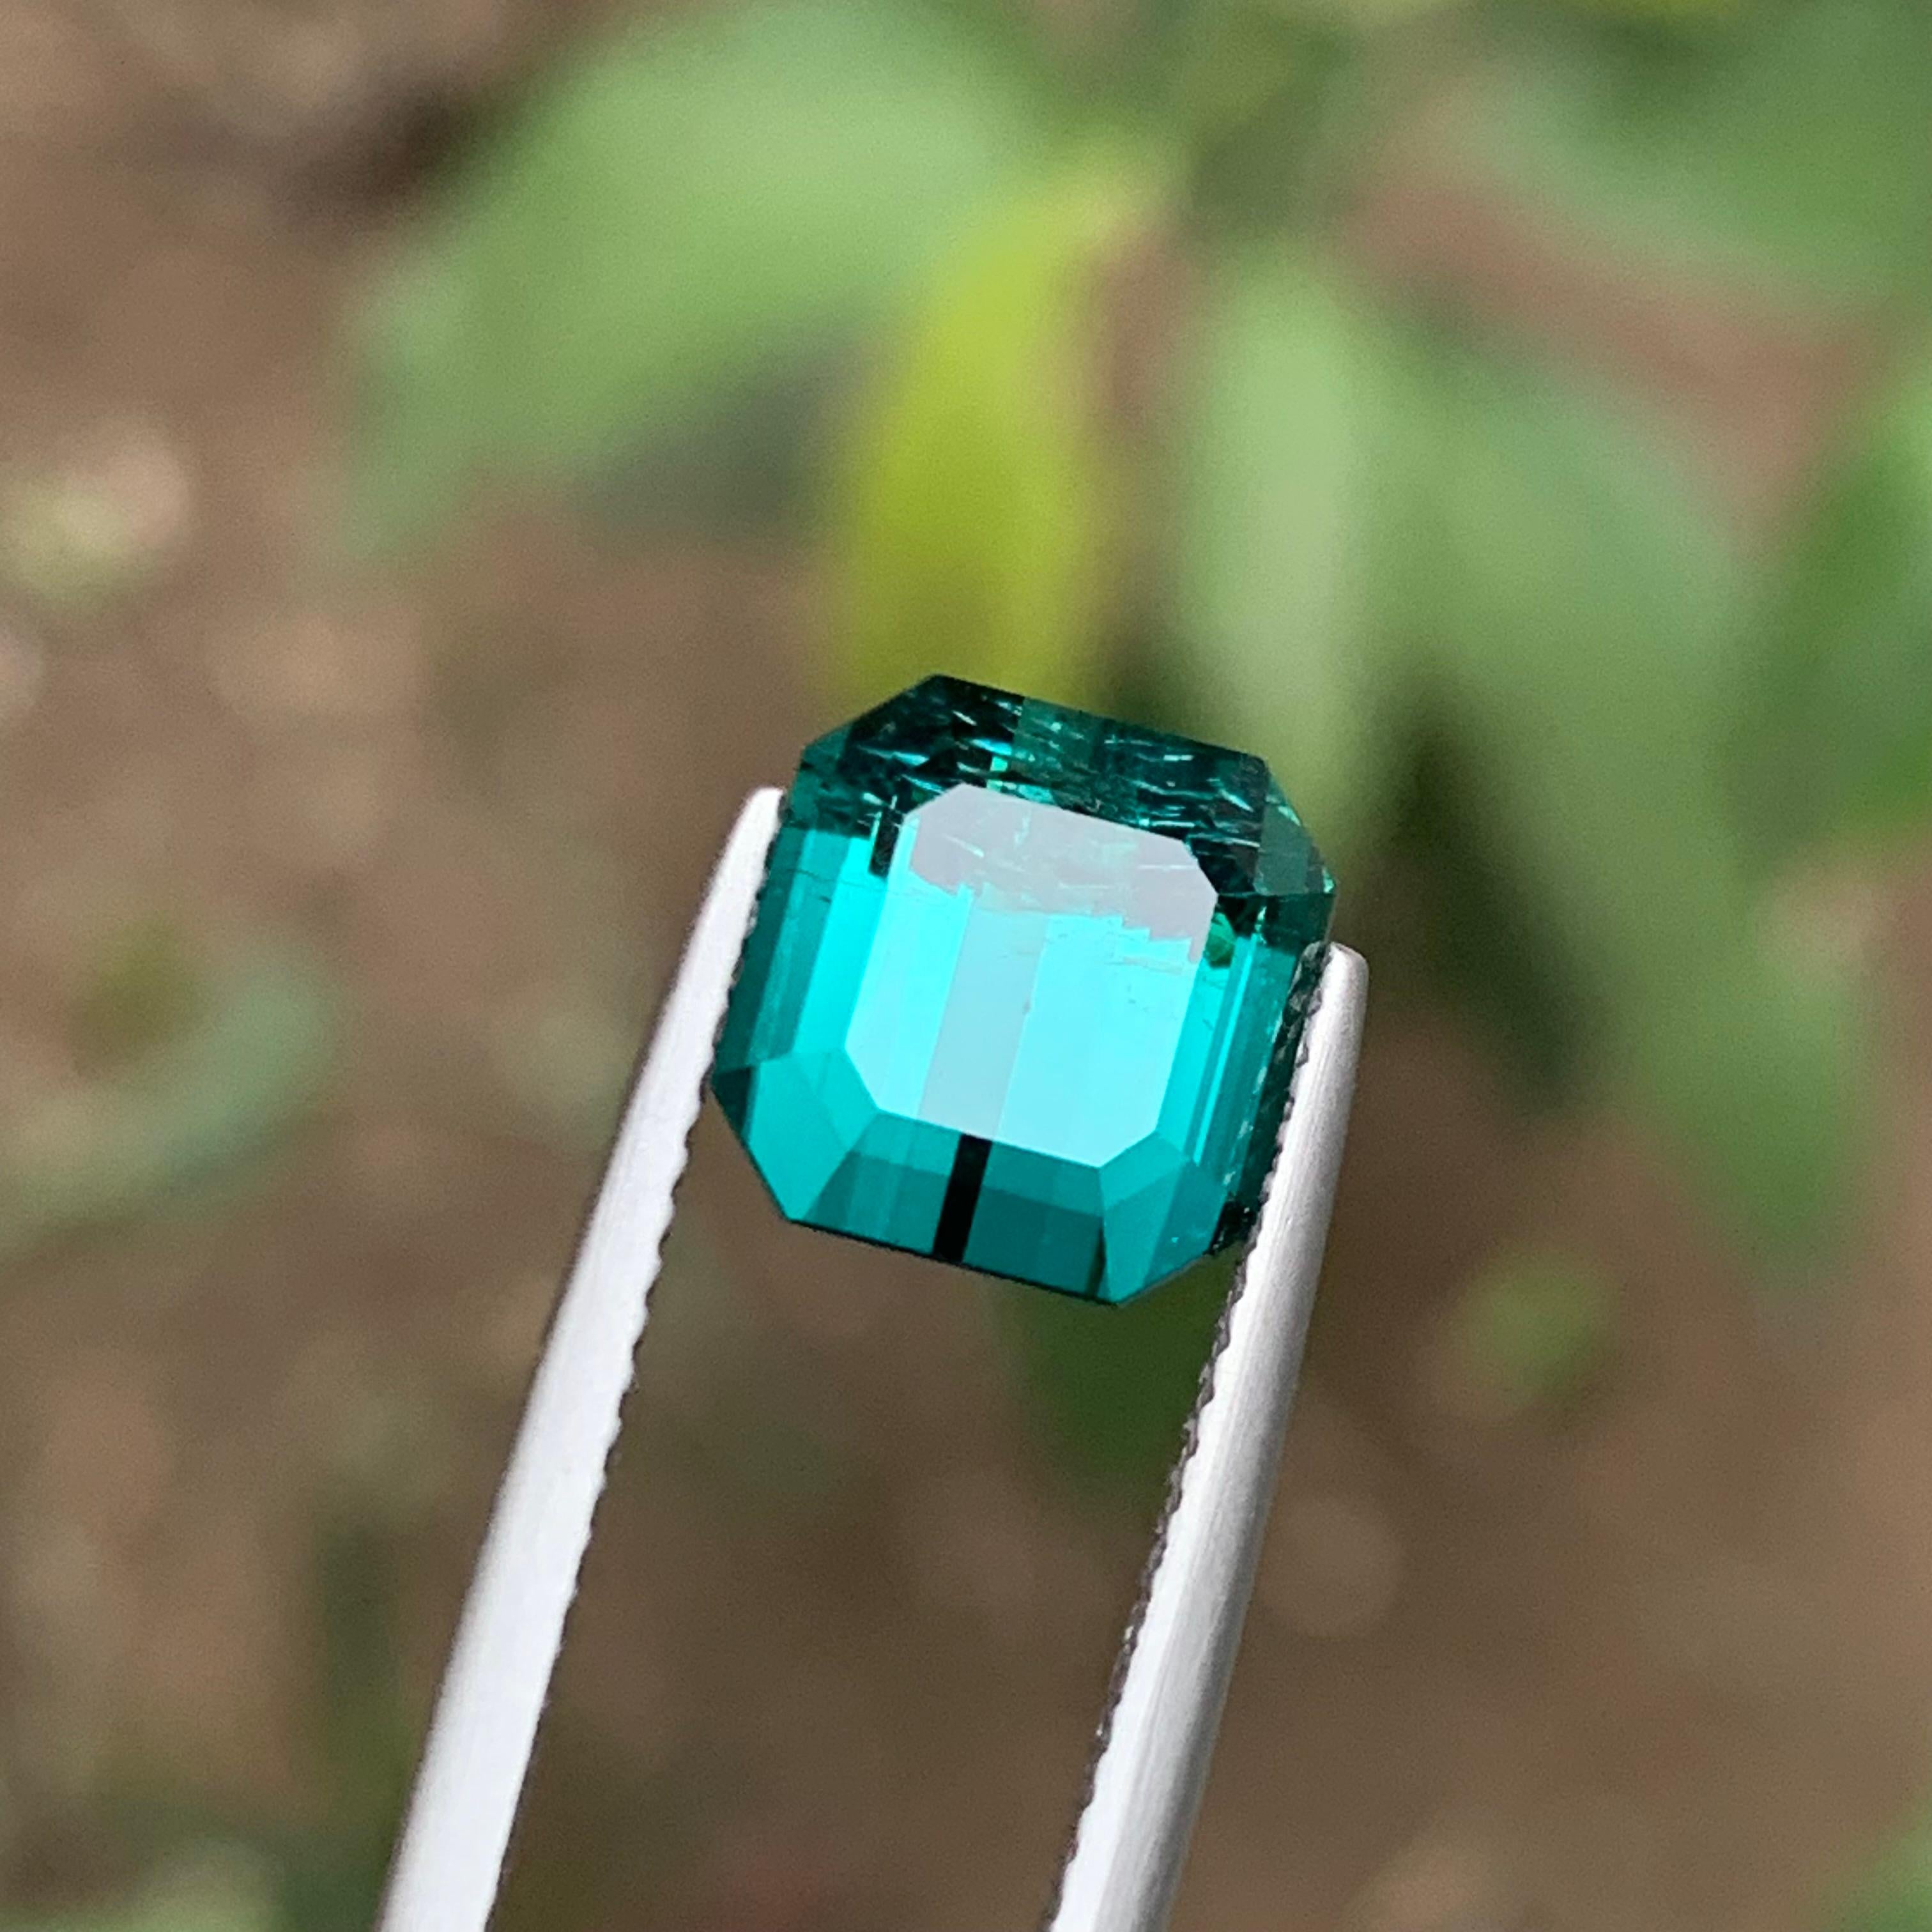 GEMSTONE TYPE: Tourmaline
PIECE(S): 1
WEIGHT: 4.20 Carat
SHAPE: Emerald
SIZE (MM): 9.08 x 8.85 x 6.04
COLOR: Vibrant Lagoon Blue
CLARITY: Slightly Included 
TREATMENT: None
ORIGIN: Afghanistan
CERTIFICATE: On demand

This captivating emerald-cut